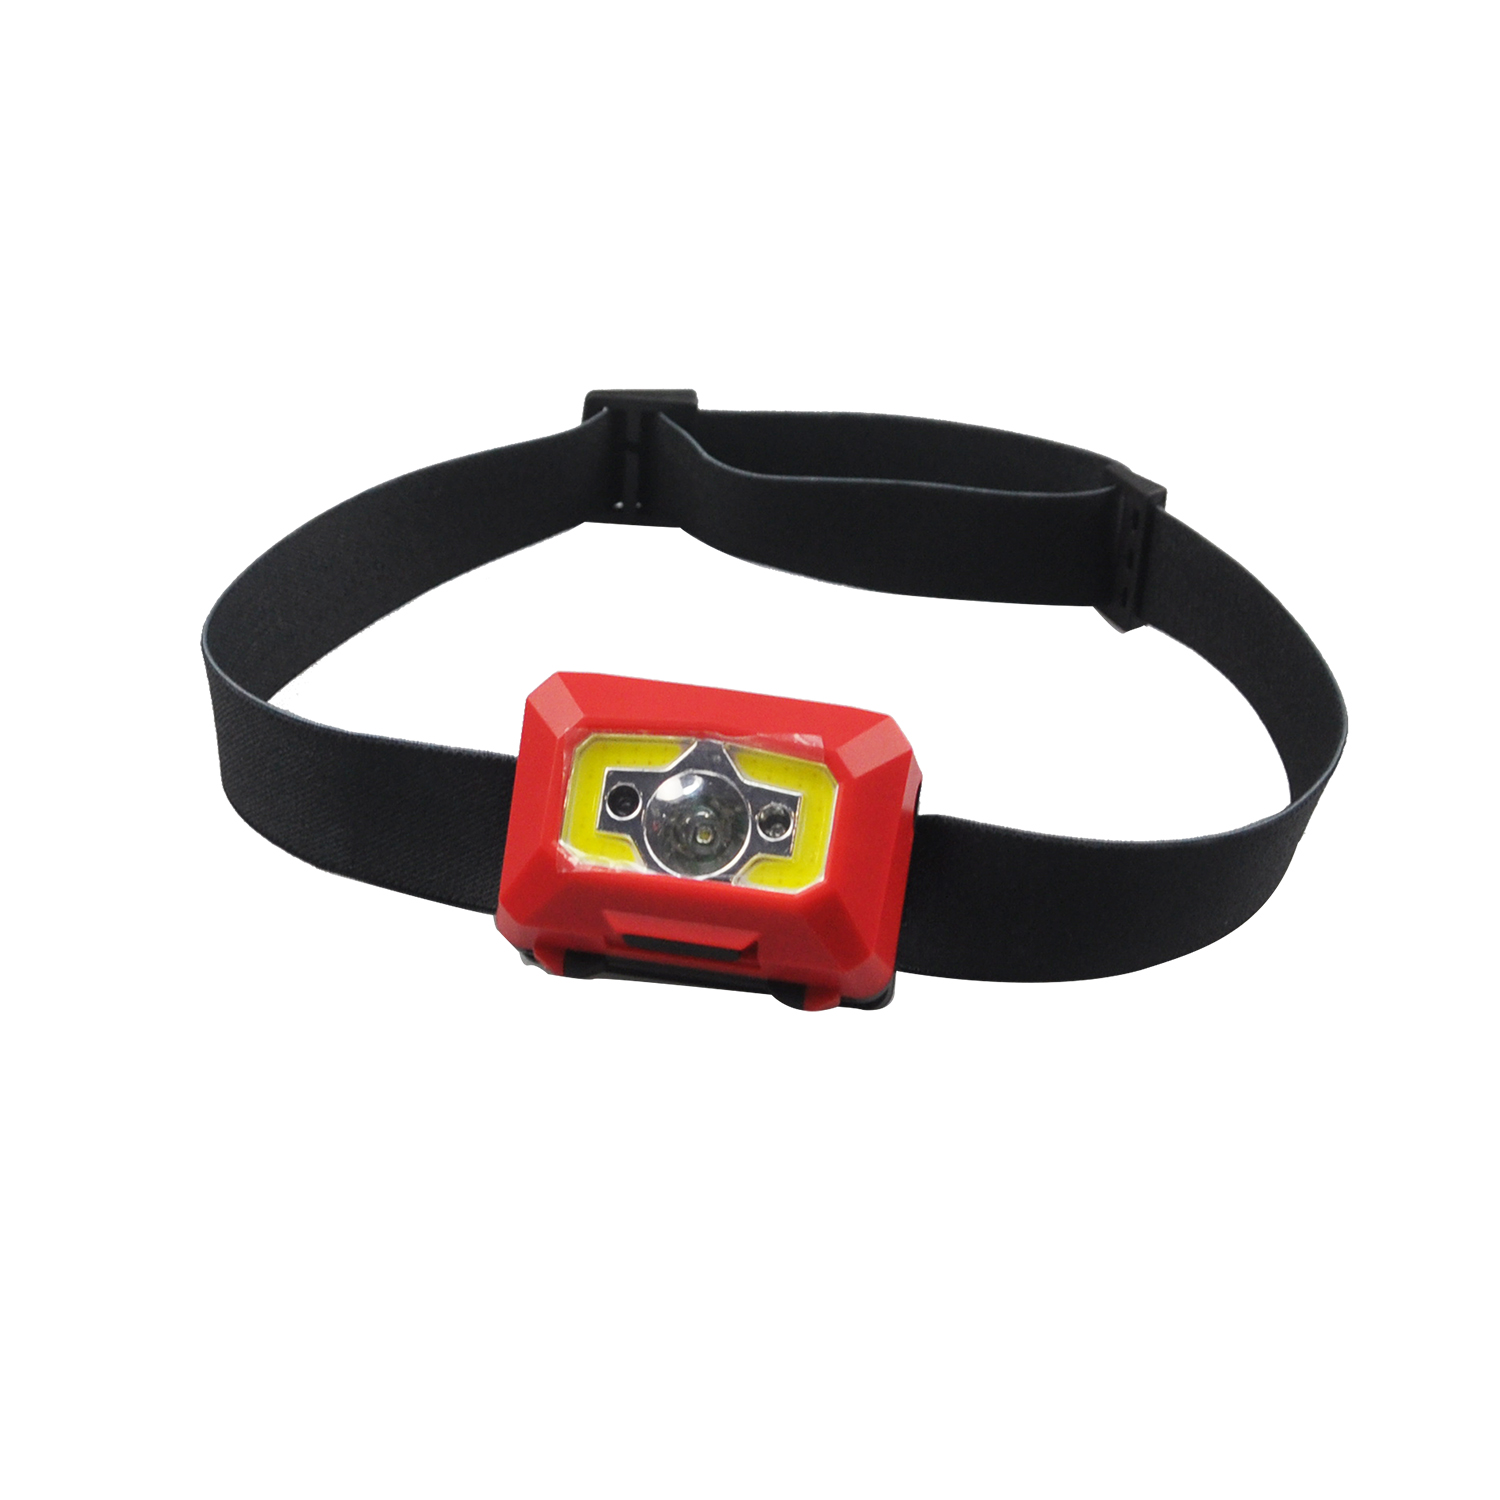 2-in-1 Multifunctional USB Charging Inductive Waterproof Strong Light Fishing Head Lamp